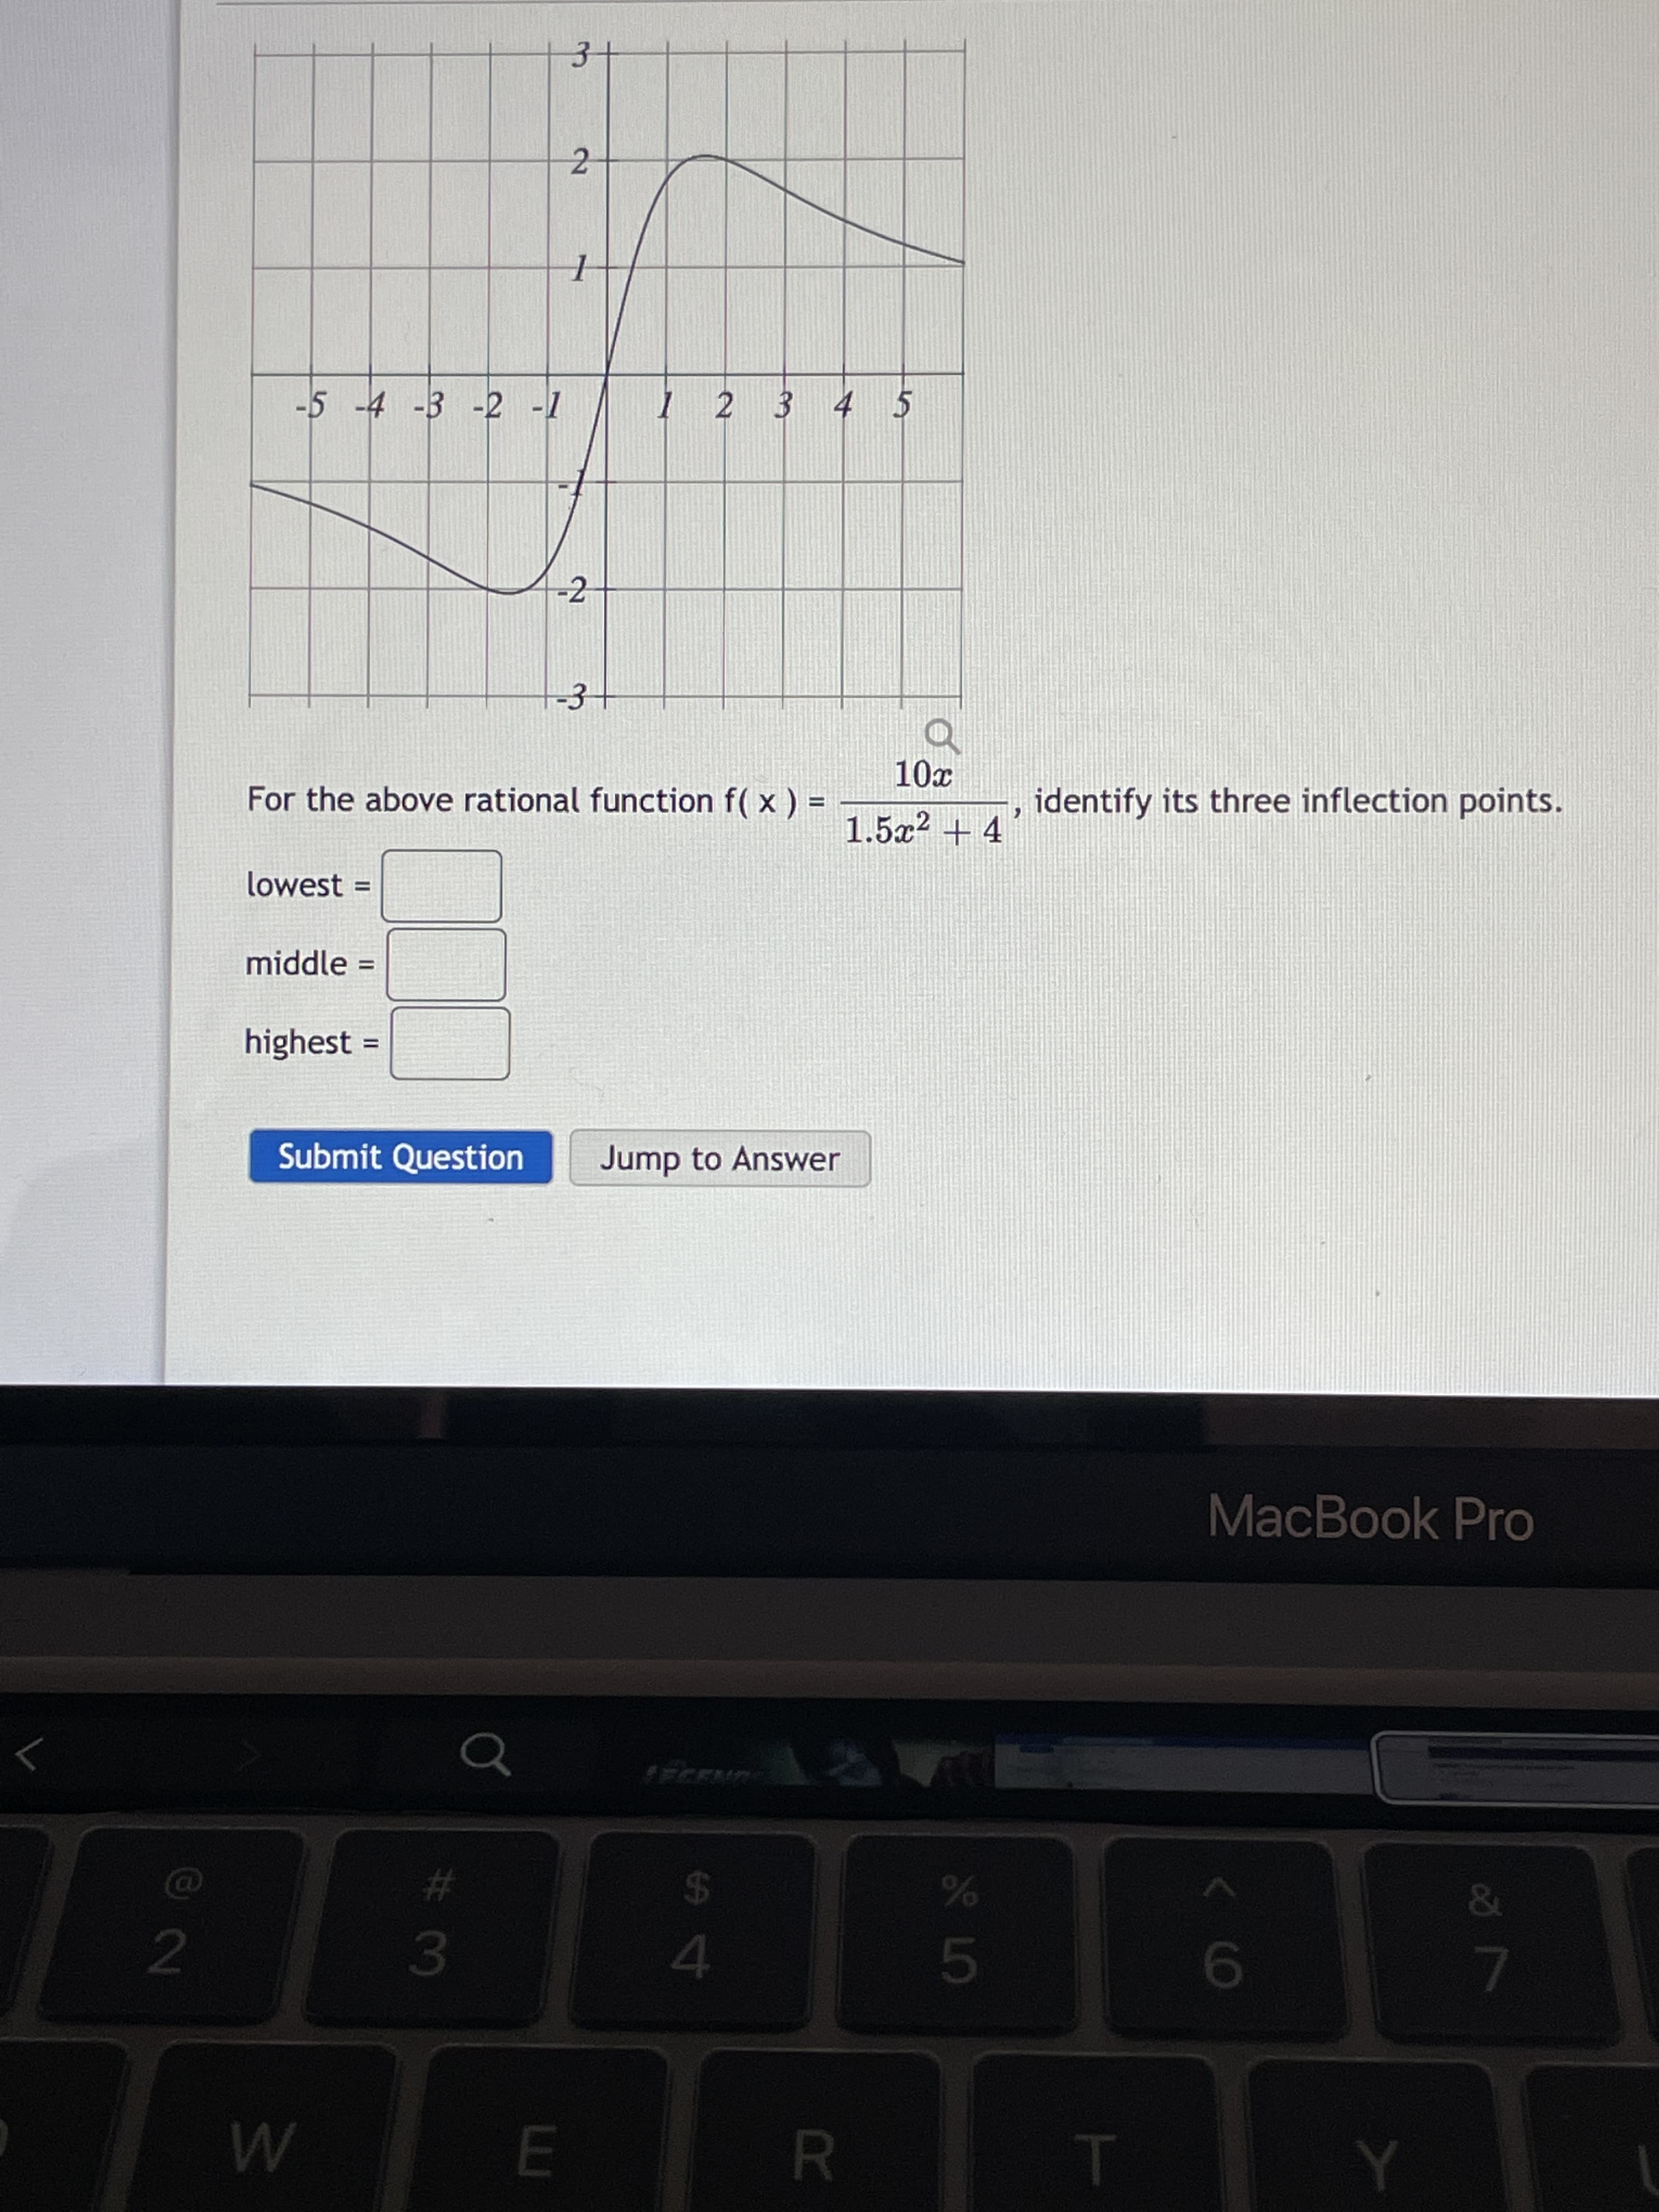 H L5
R
3+
-5 -4 -3 -2 -1
I 2 3 4 5
-2
-3
For the above rational function f( x ) =
identify its three inflection points.
%3D
1.5x? + 4
lowest
middle
%3D
highest
Submit Question
Jump to Answer
MacBook Pro
&
23
24
2
3.
4.
